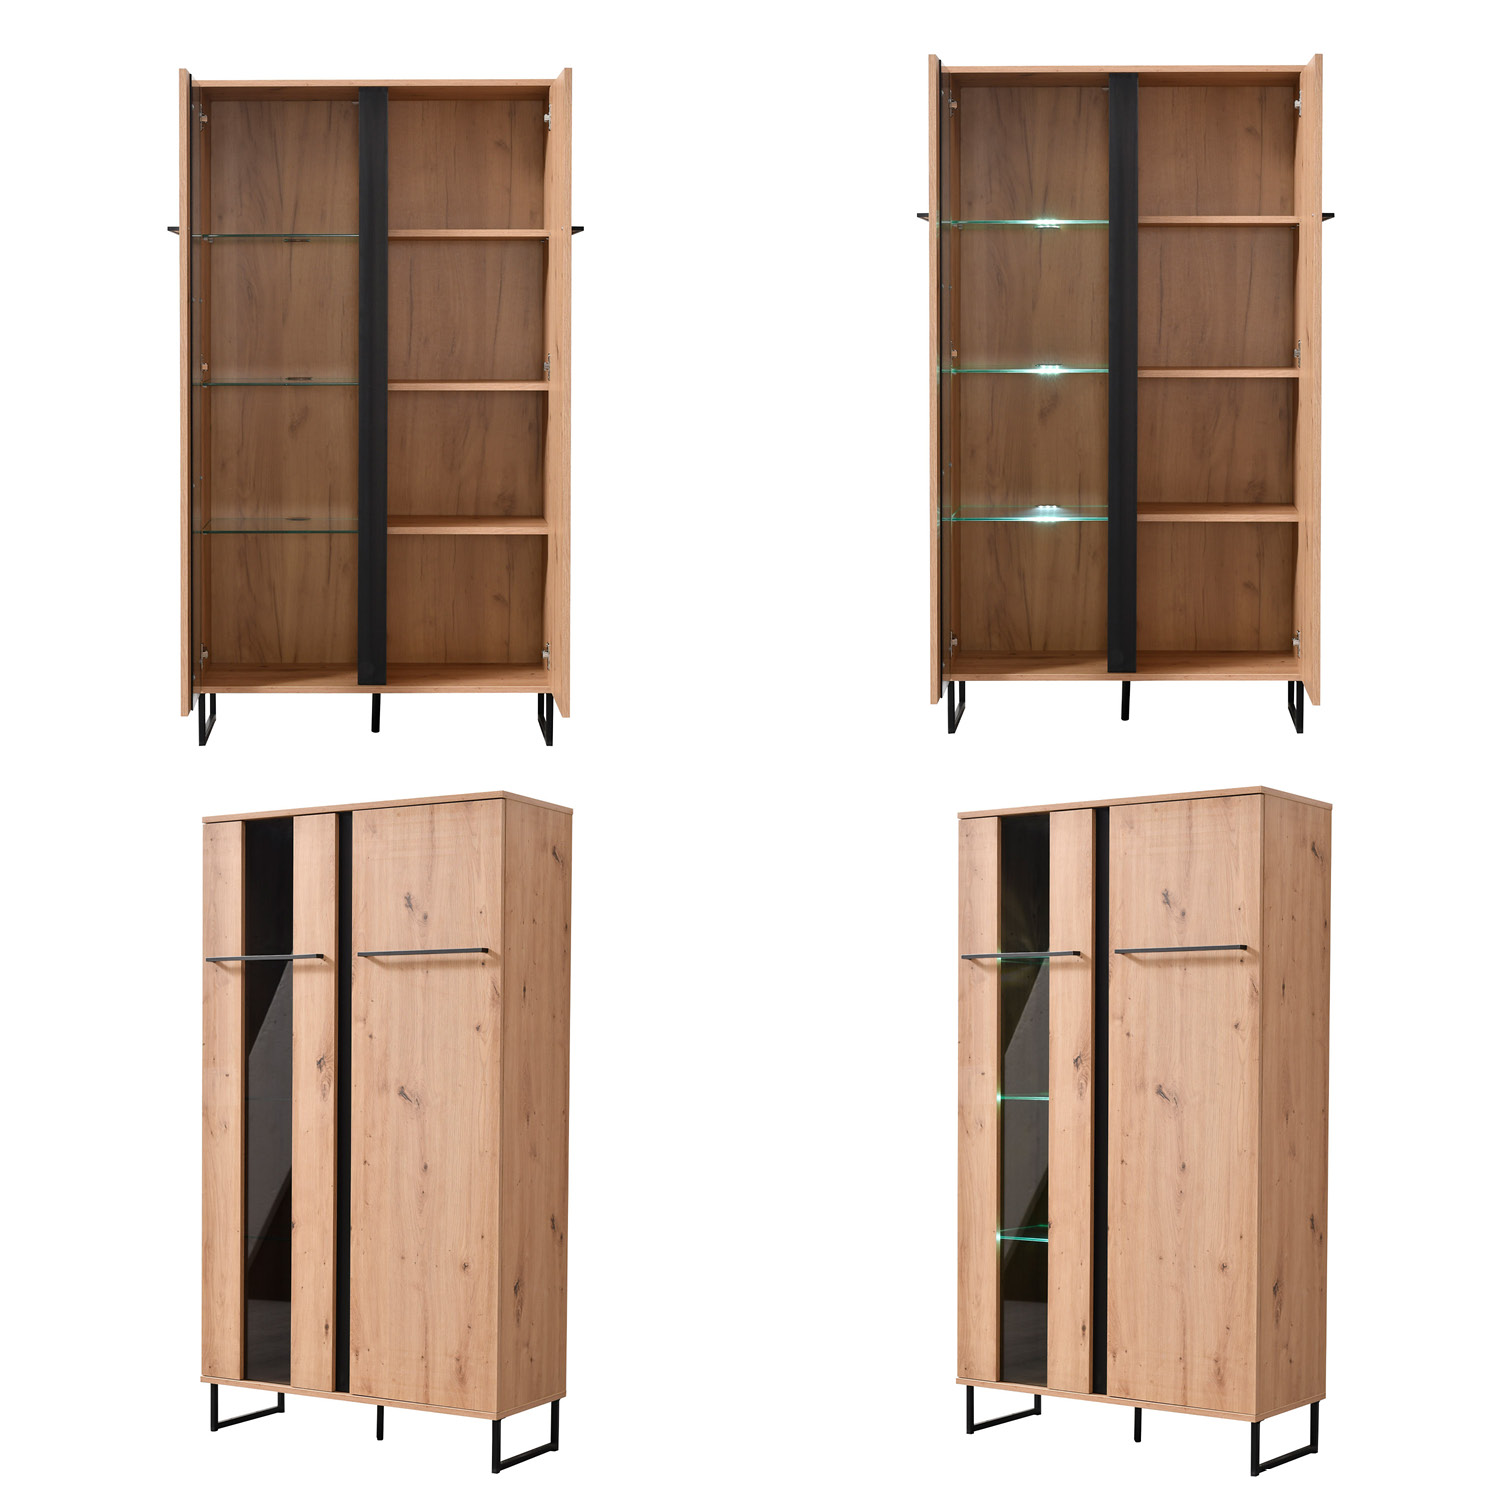 Modern Living Room Unit Cupboard Set Wall Unit 3-Piece TV Set with Storage Entertainment Center Industrial Style